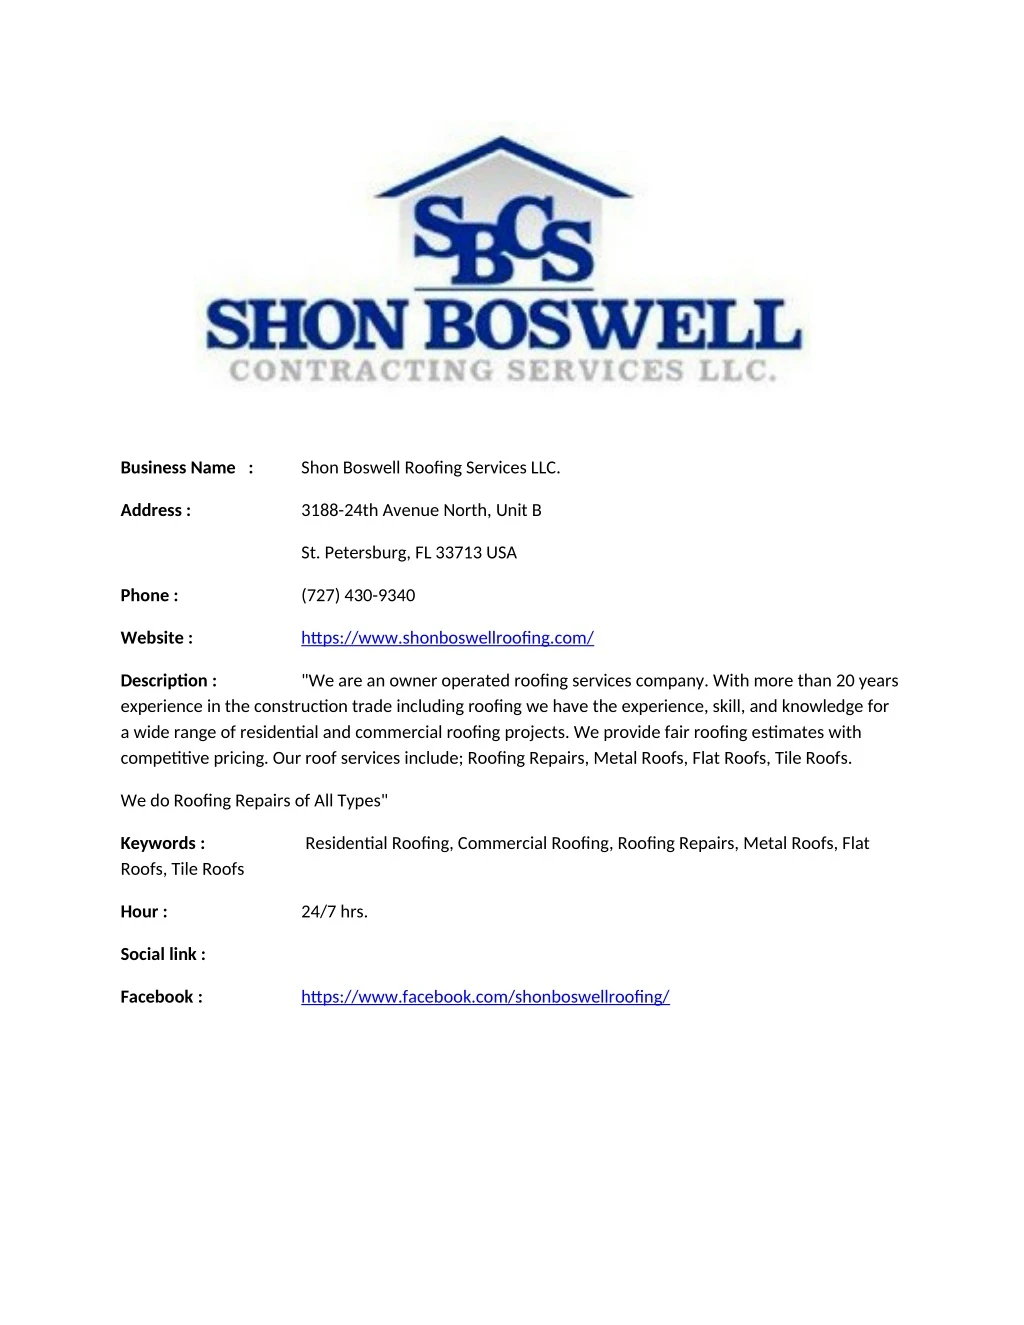 business name shon boswell roofnn services llc